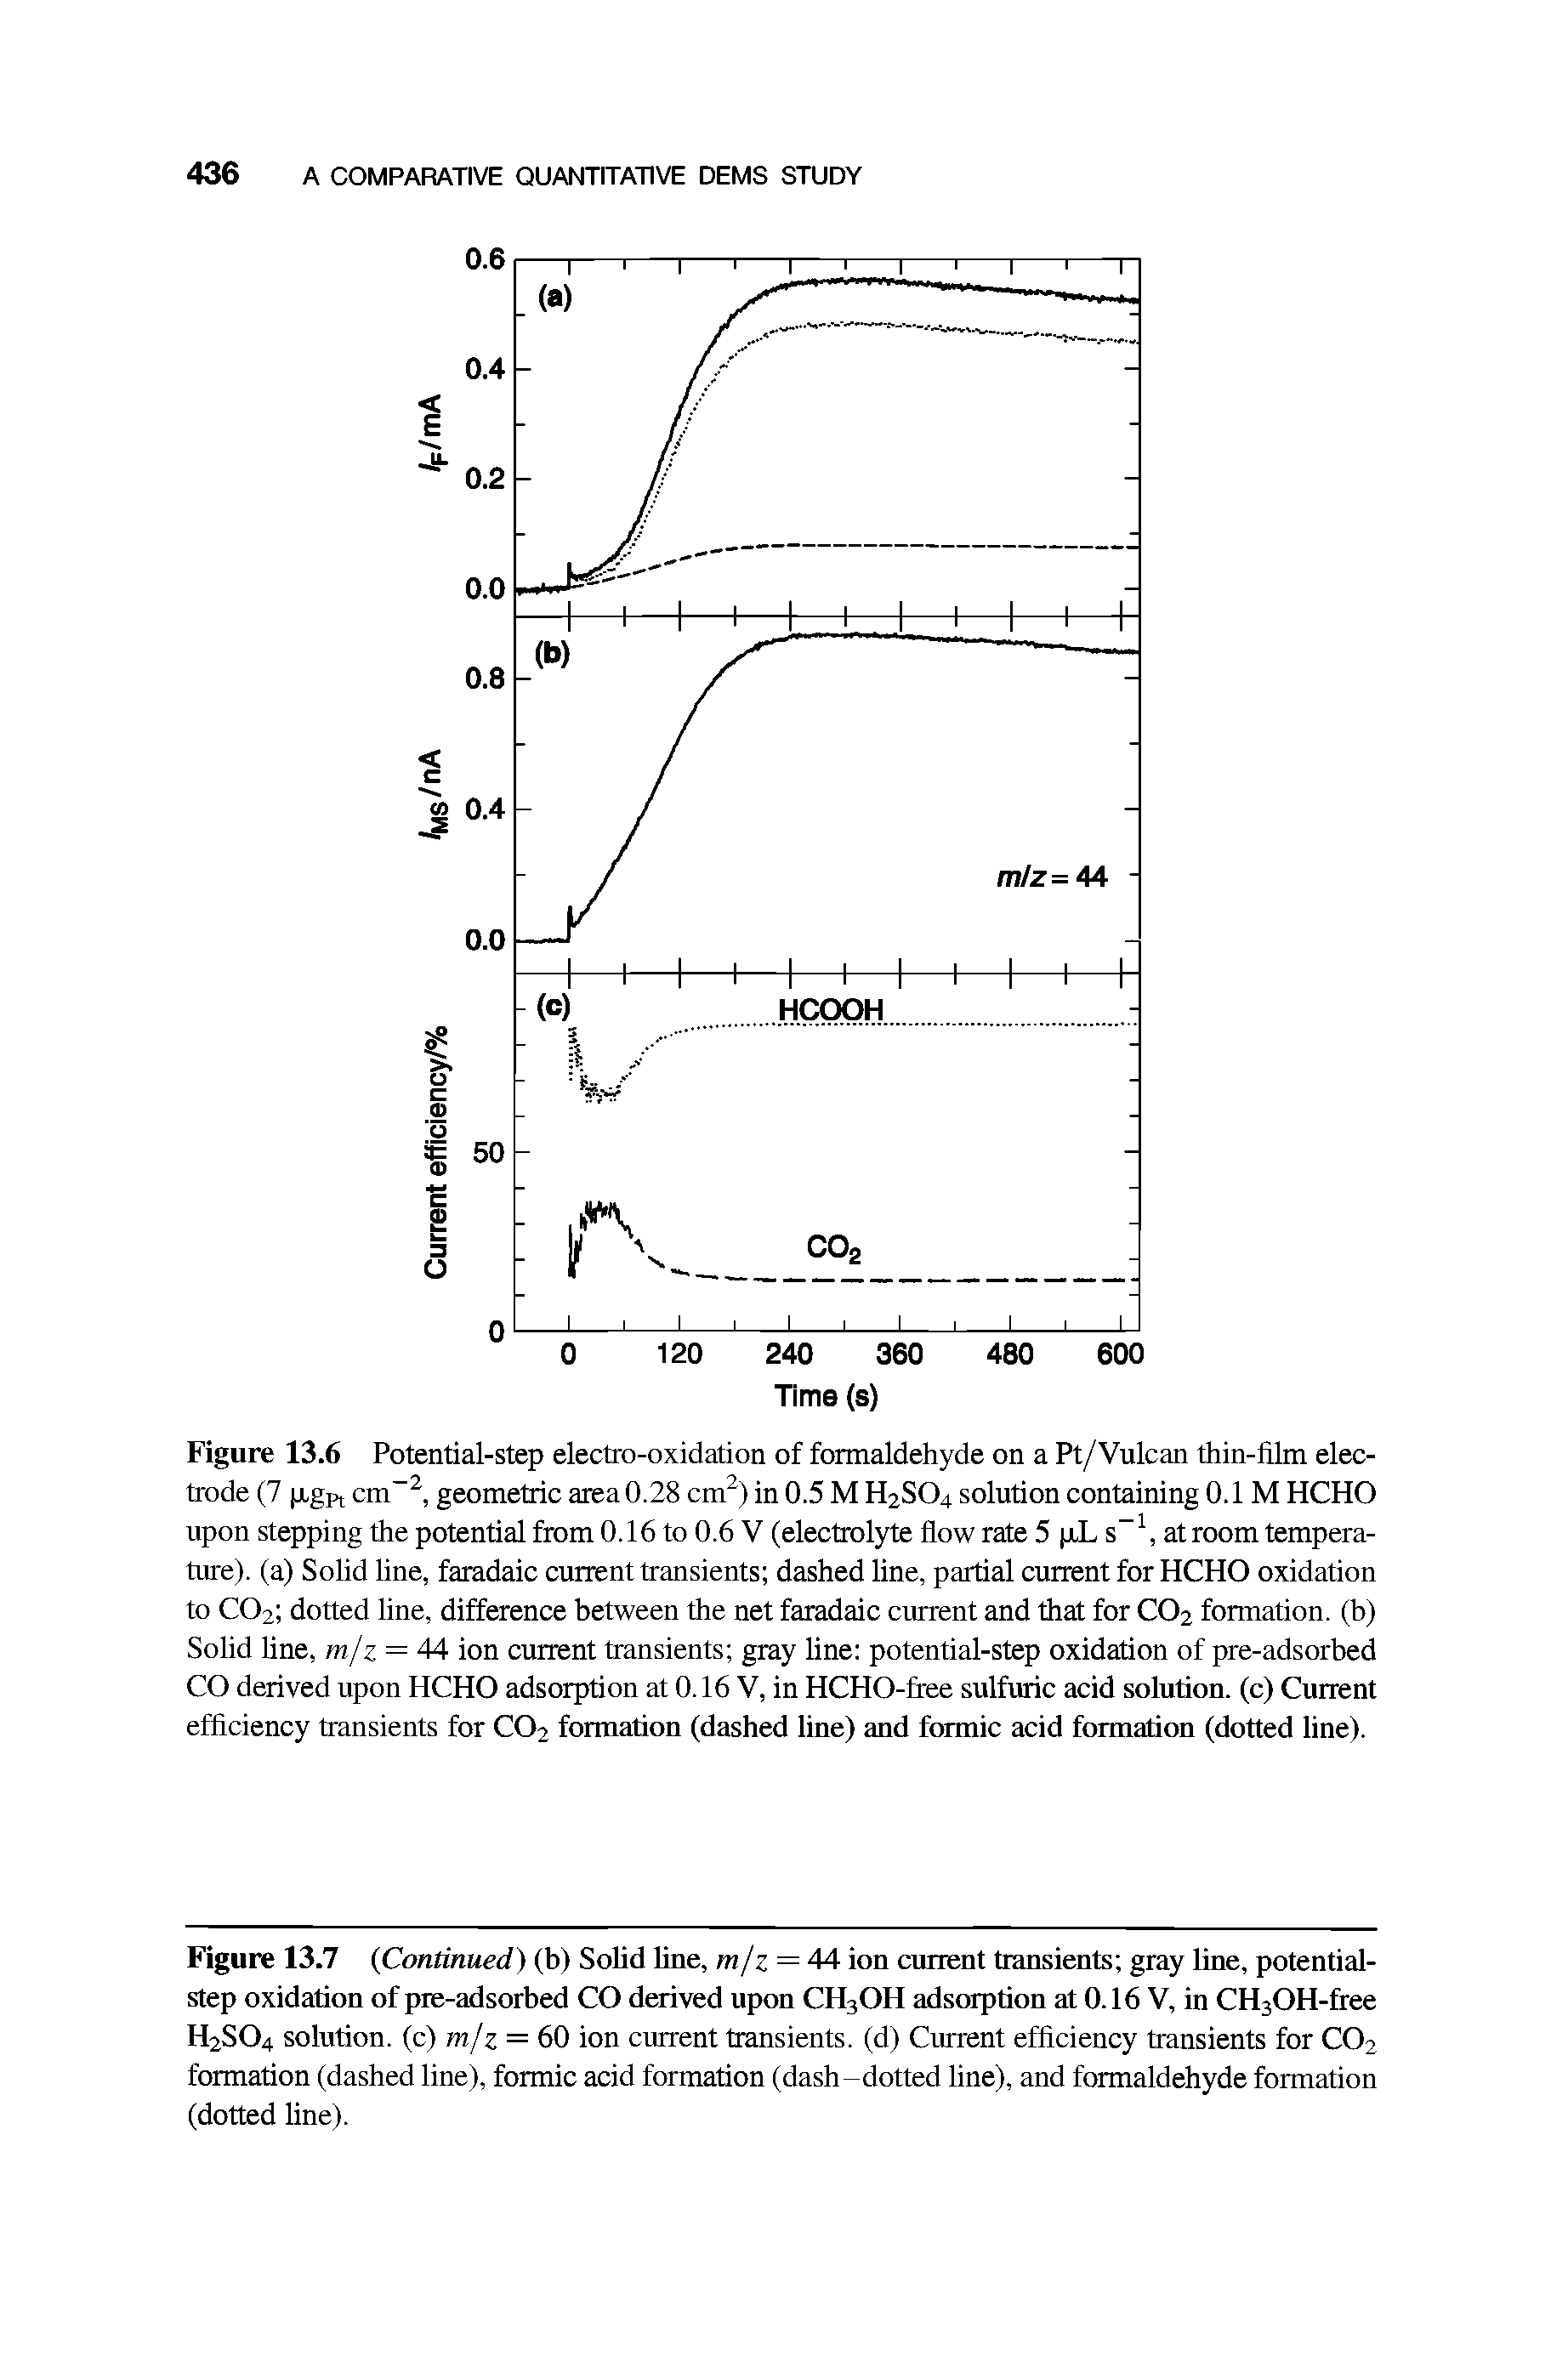 Figure 13.7 (Continued) (b) Solid line, m/z = 44 ion current transients gray line, potential-step oxidation of pre-adsorbed CO derived upon CH3OH adsorption at 0.16 V, in CHsOH-free H2SO4 solution, (c) m/z = 60 ion current transients, (d) Current efficiency transients for CO2 formation (dashed line), formic acid formation (dash-dotted line), and formaldehyde formation (dotted line).